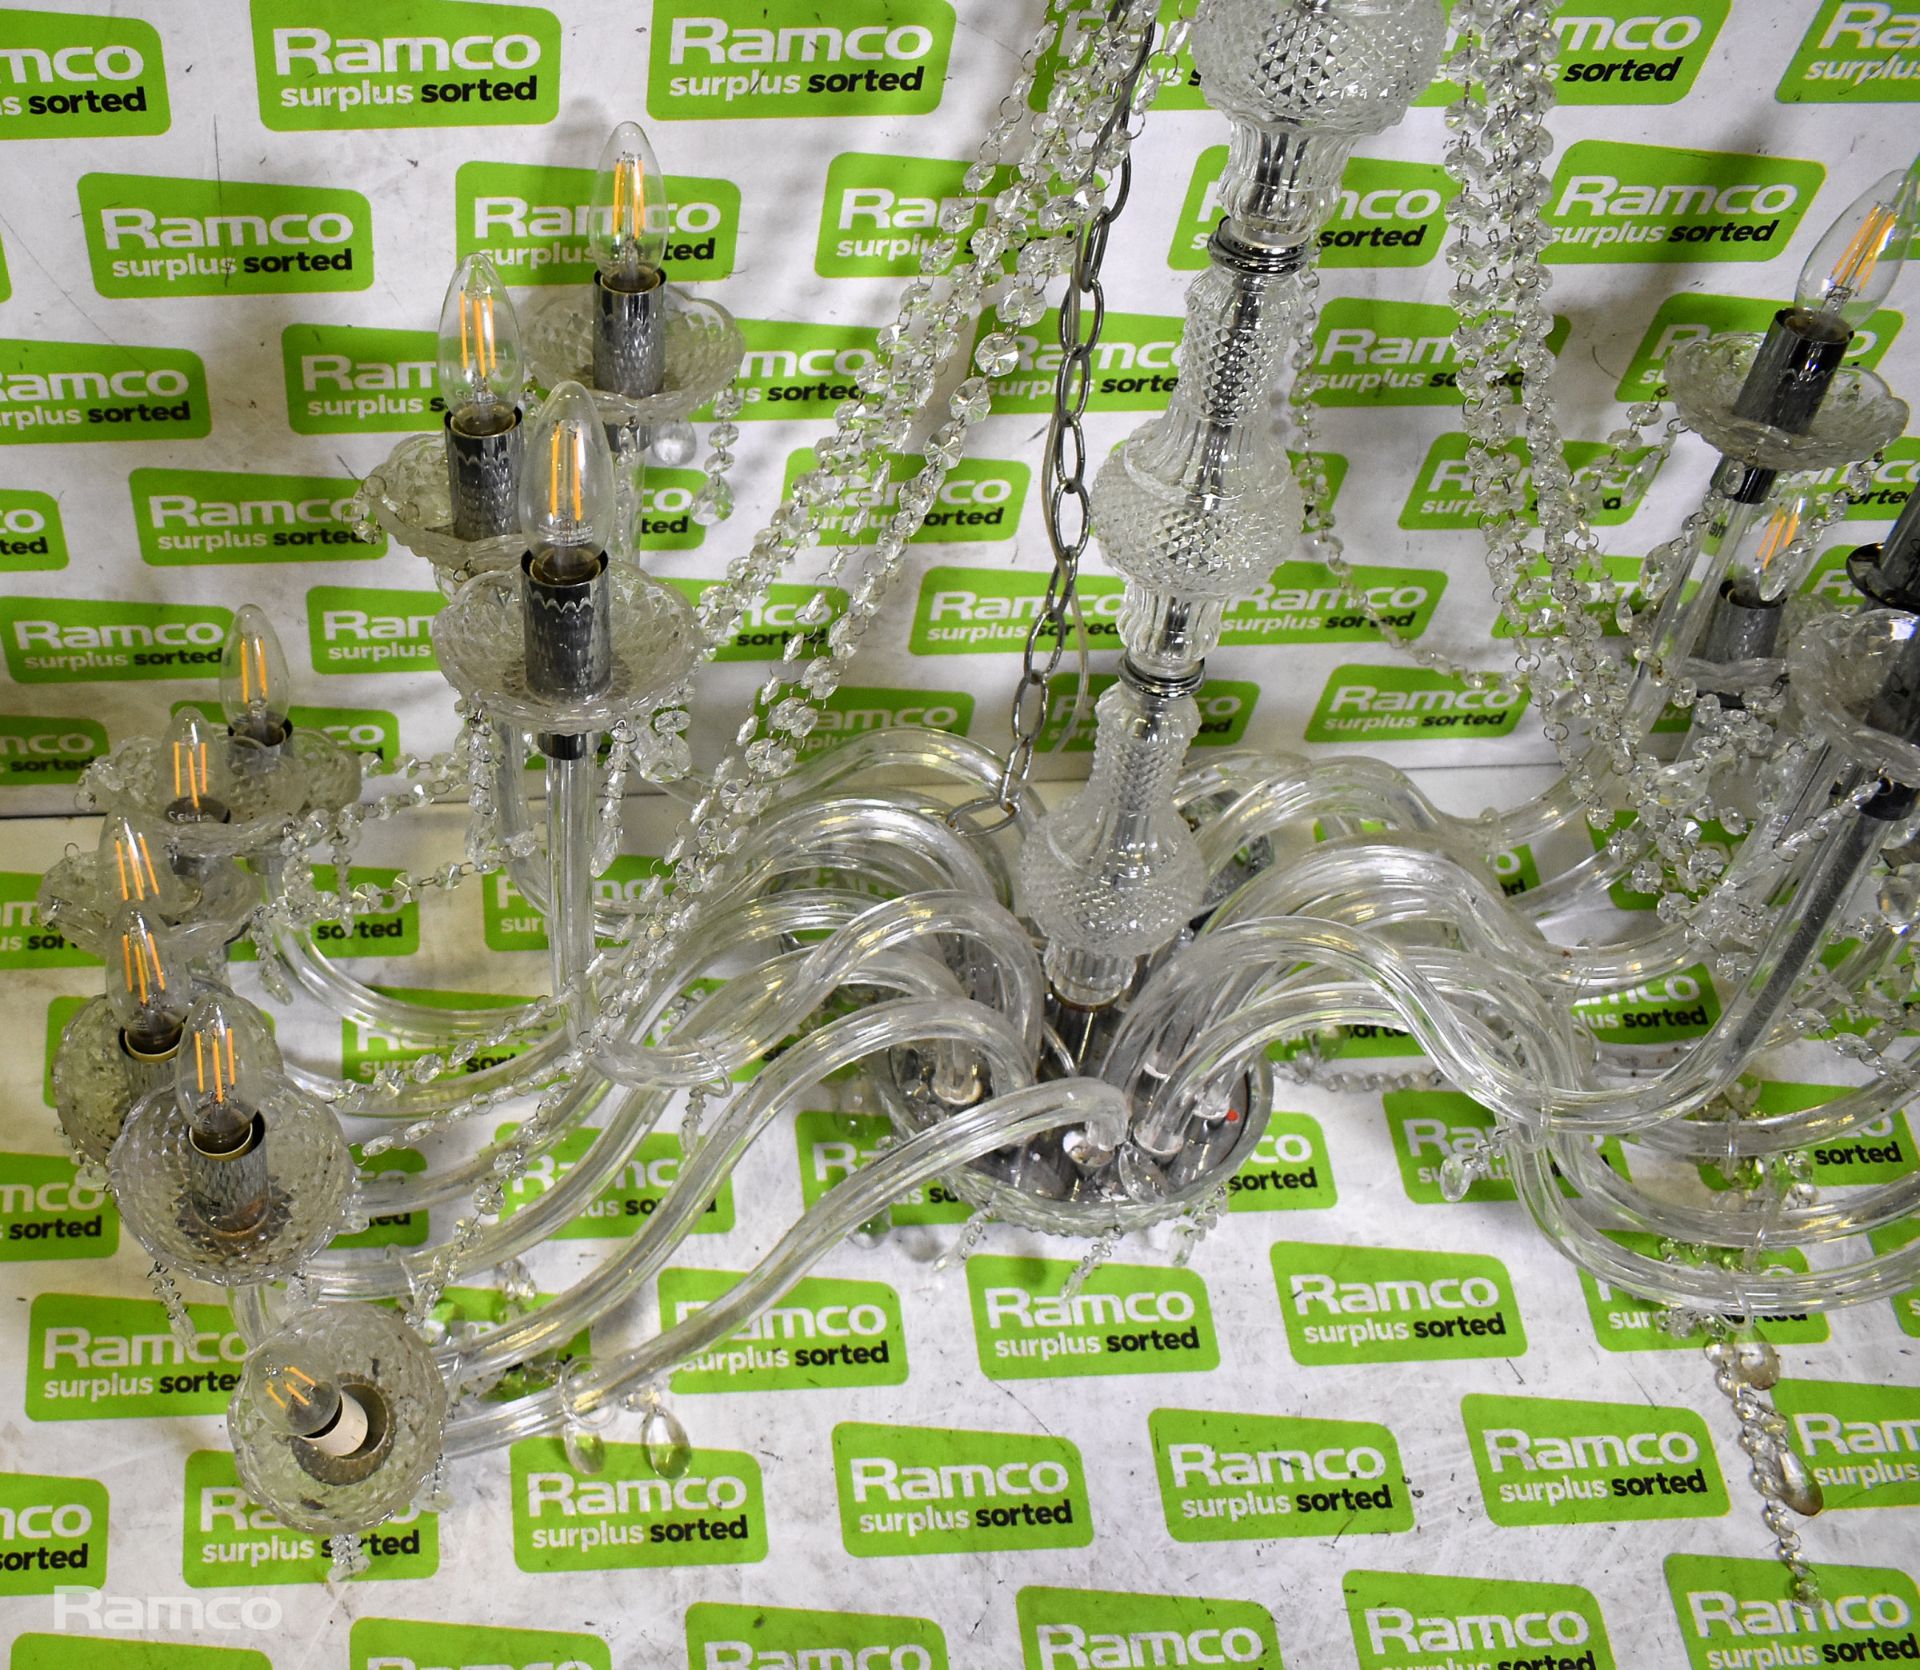 Katie 18lt Chandelier - polished chrome finish clear acrylic droppers and beads - 18 x 40W - Image 3 of 7